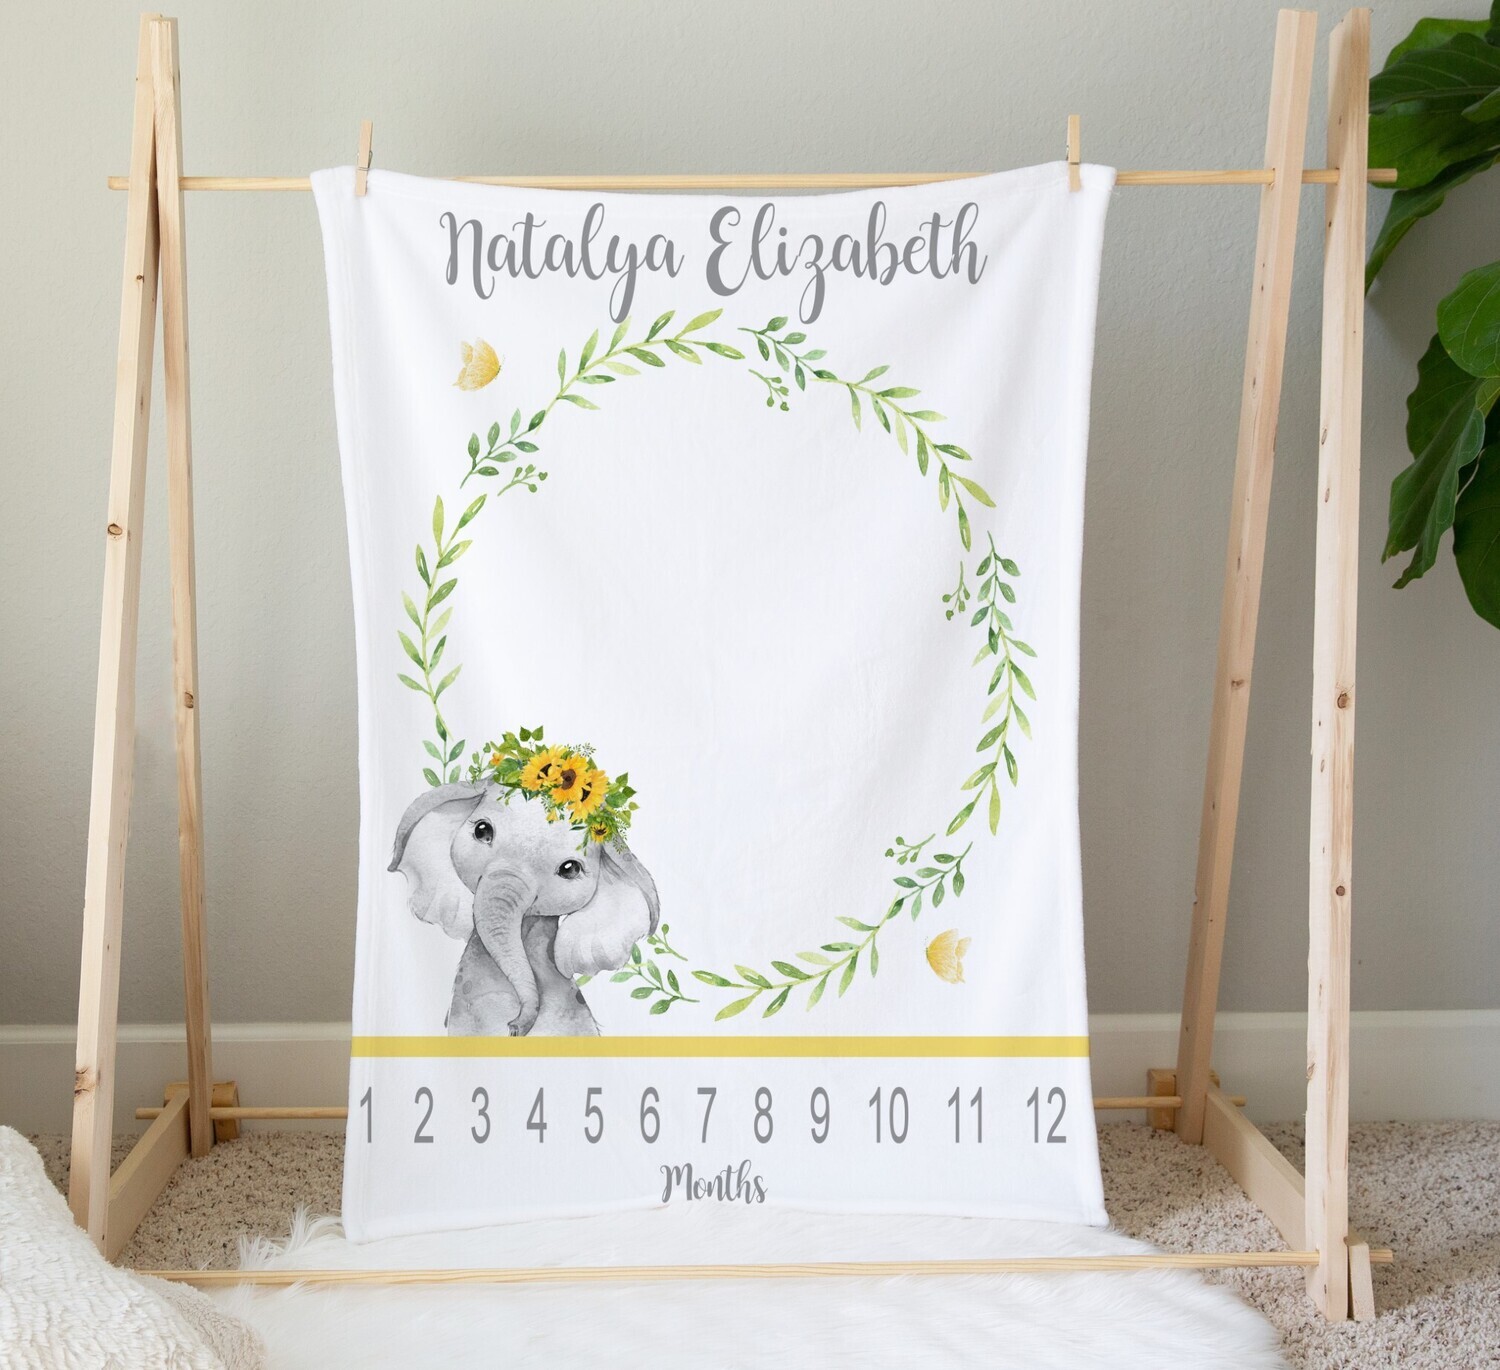 Sunflower Milestone Baby Girl Blanket Yellow Floral Crown Elephant Personalized Monthly Baby Blanket New Baby Shower Gift Baby Photo Op Backdrop